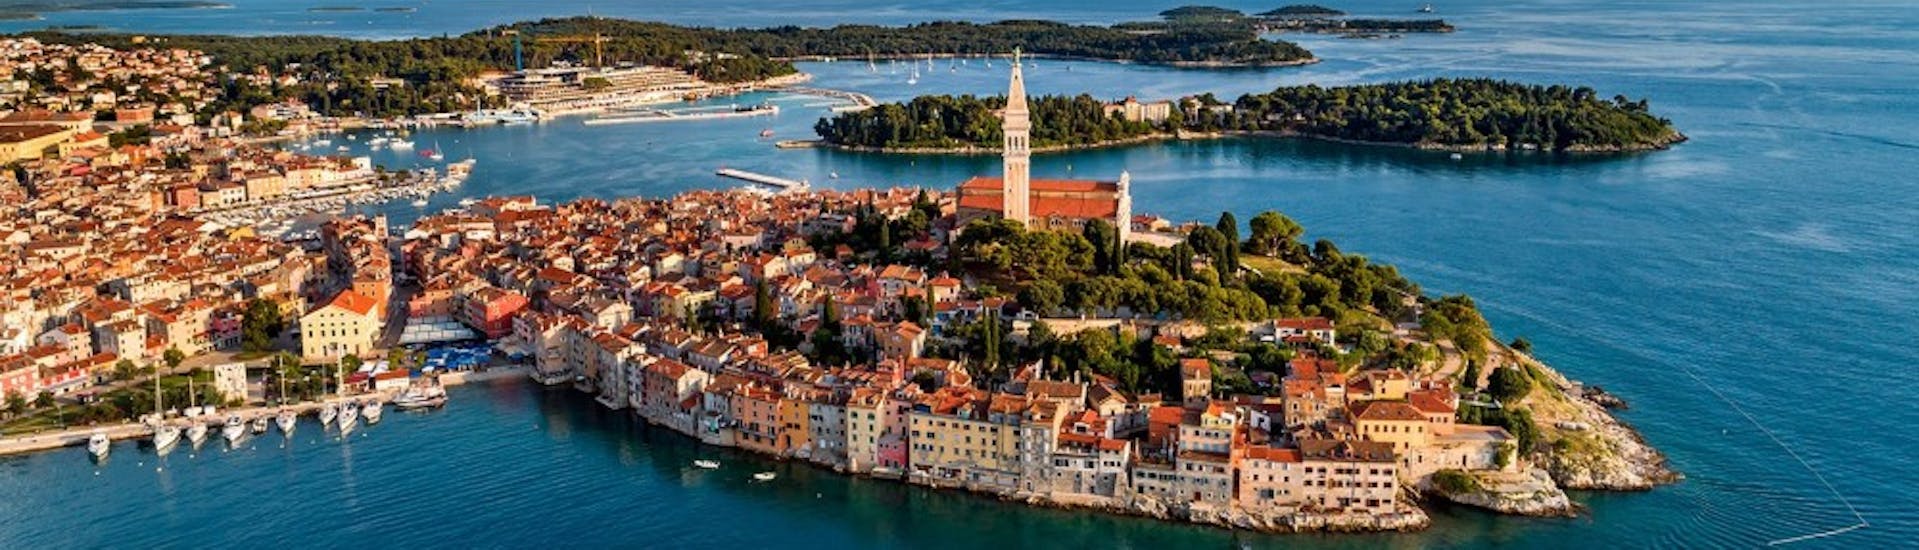 View of the historic town Rovinj, which you are going to visit during the Private Boat Trip to Rovinj from Fažana with Sea Tours Istria Fažana.